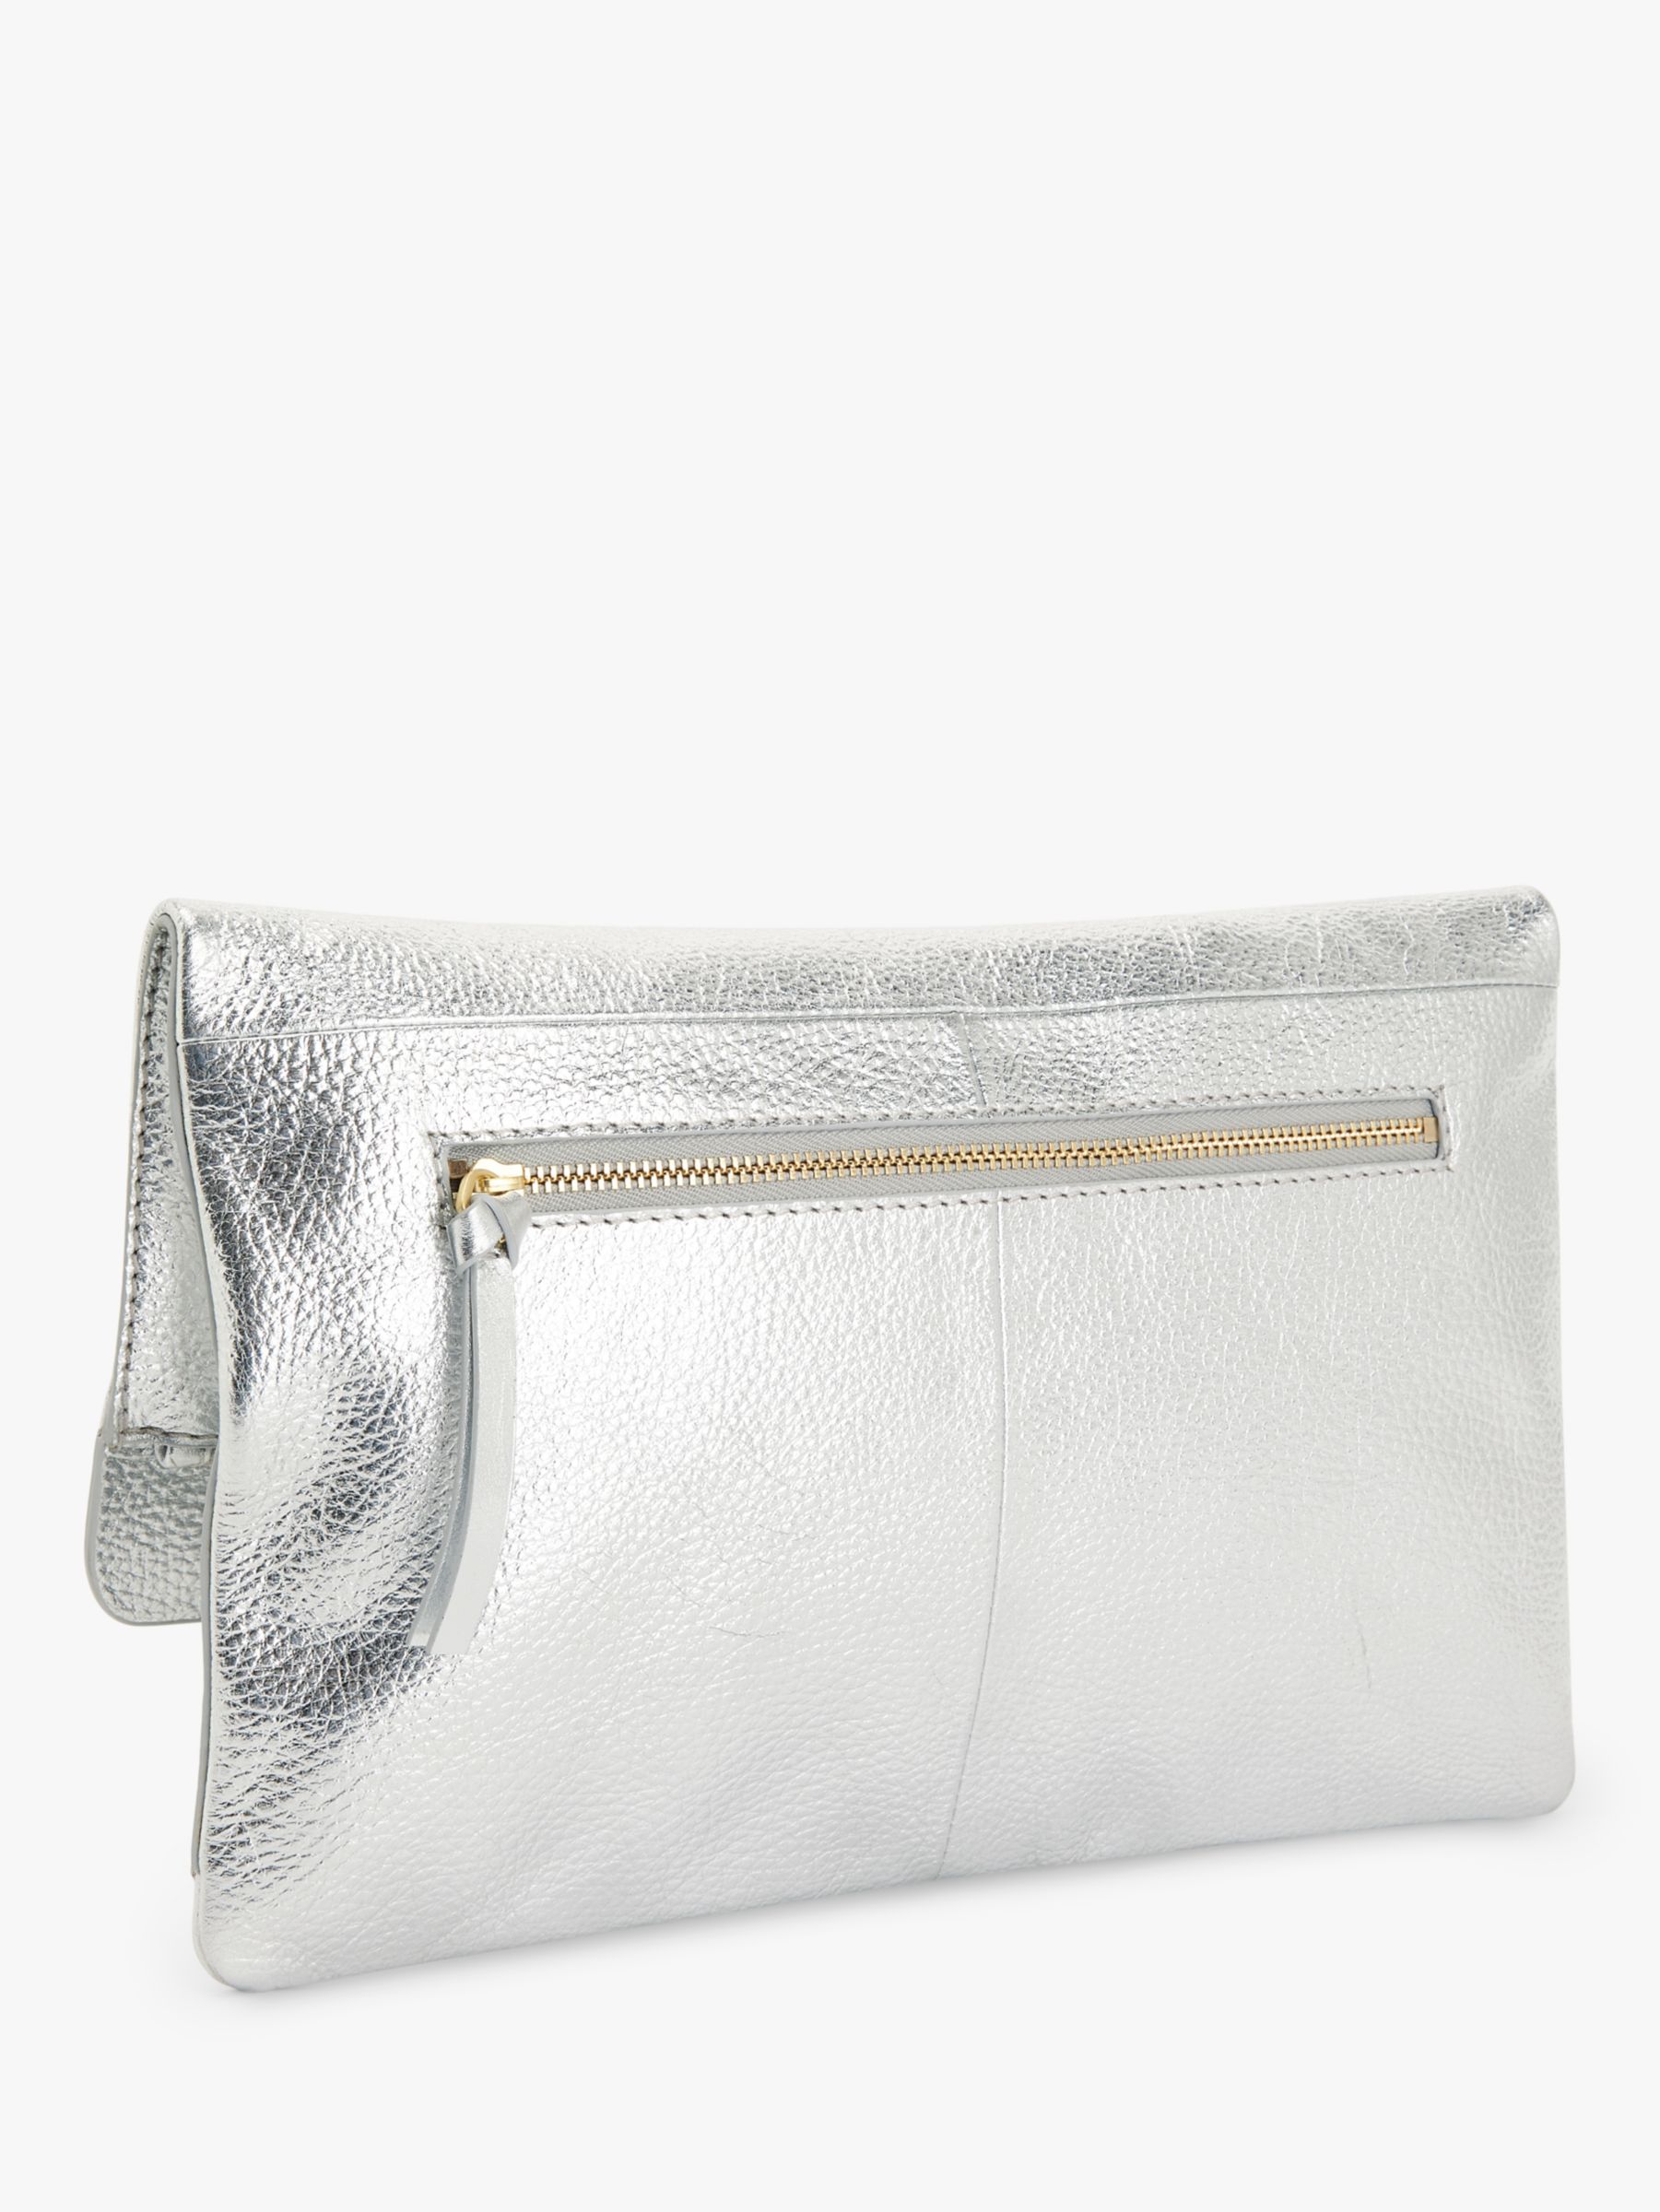 John Lewis Mistry Leather Flapover Clutch Bag, Silver Leather at 